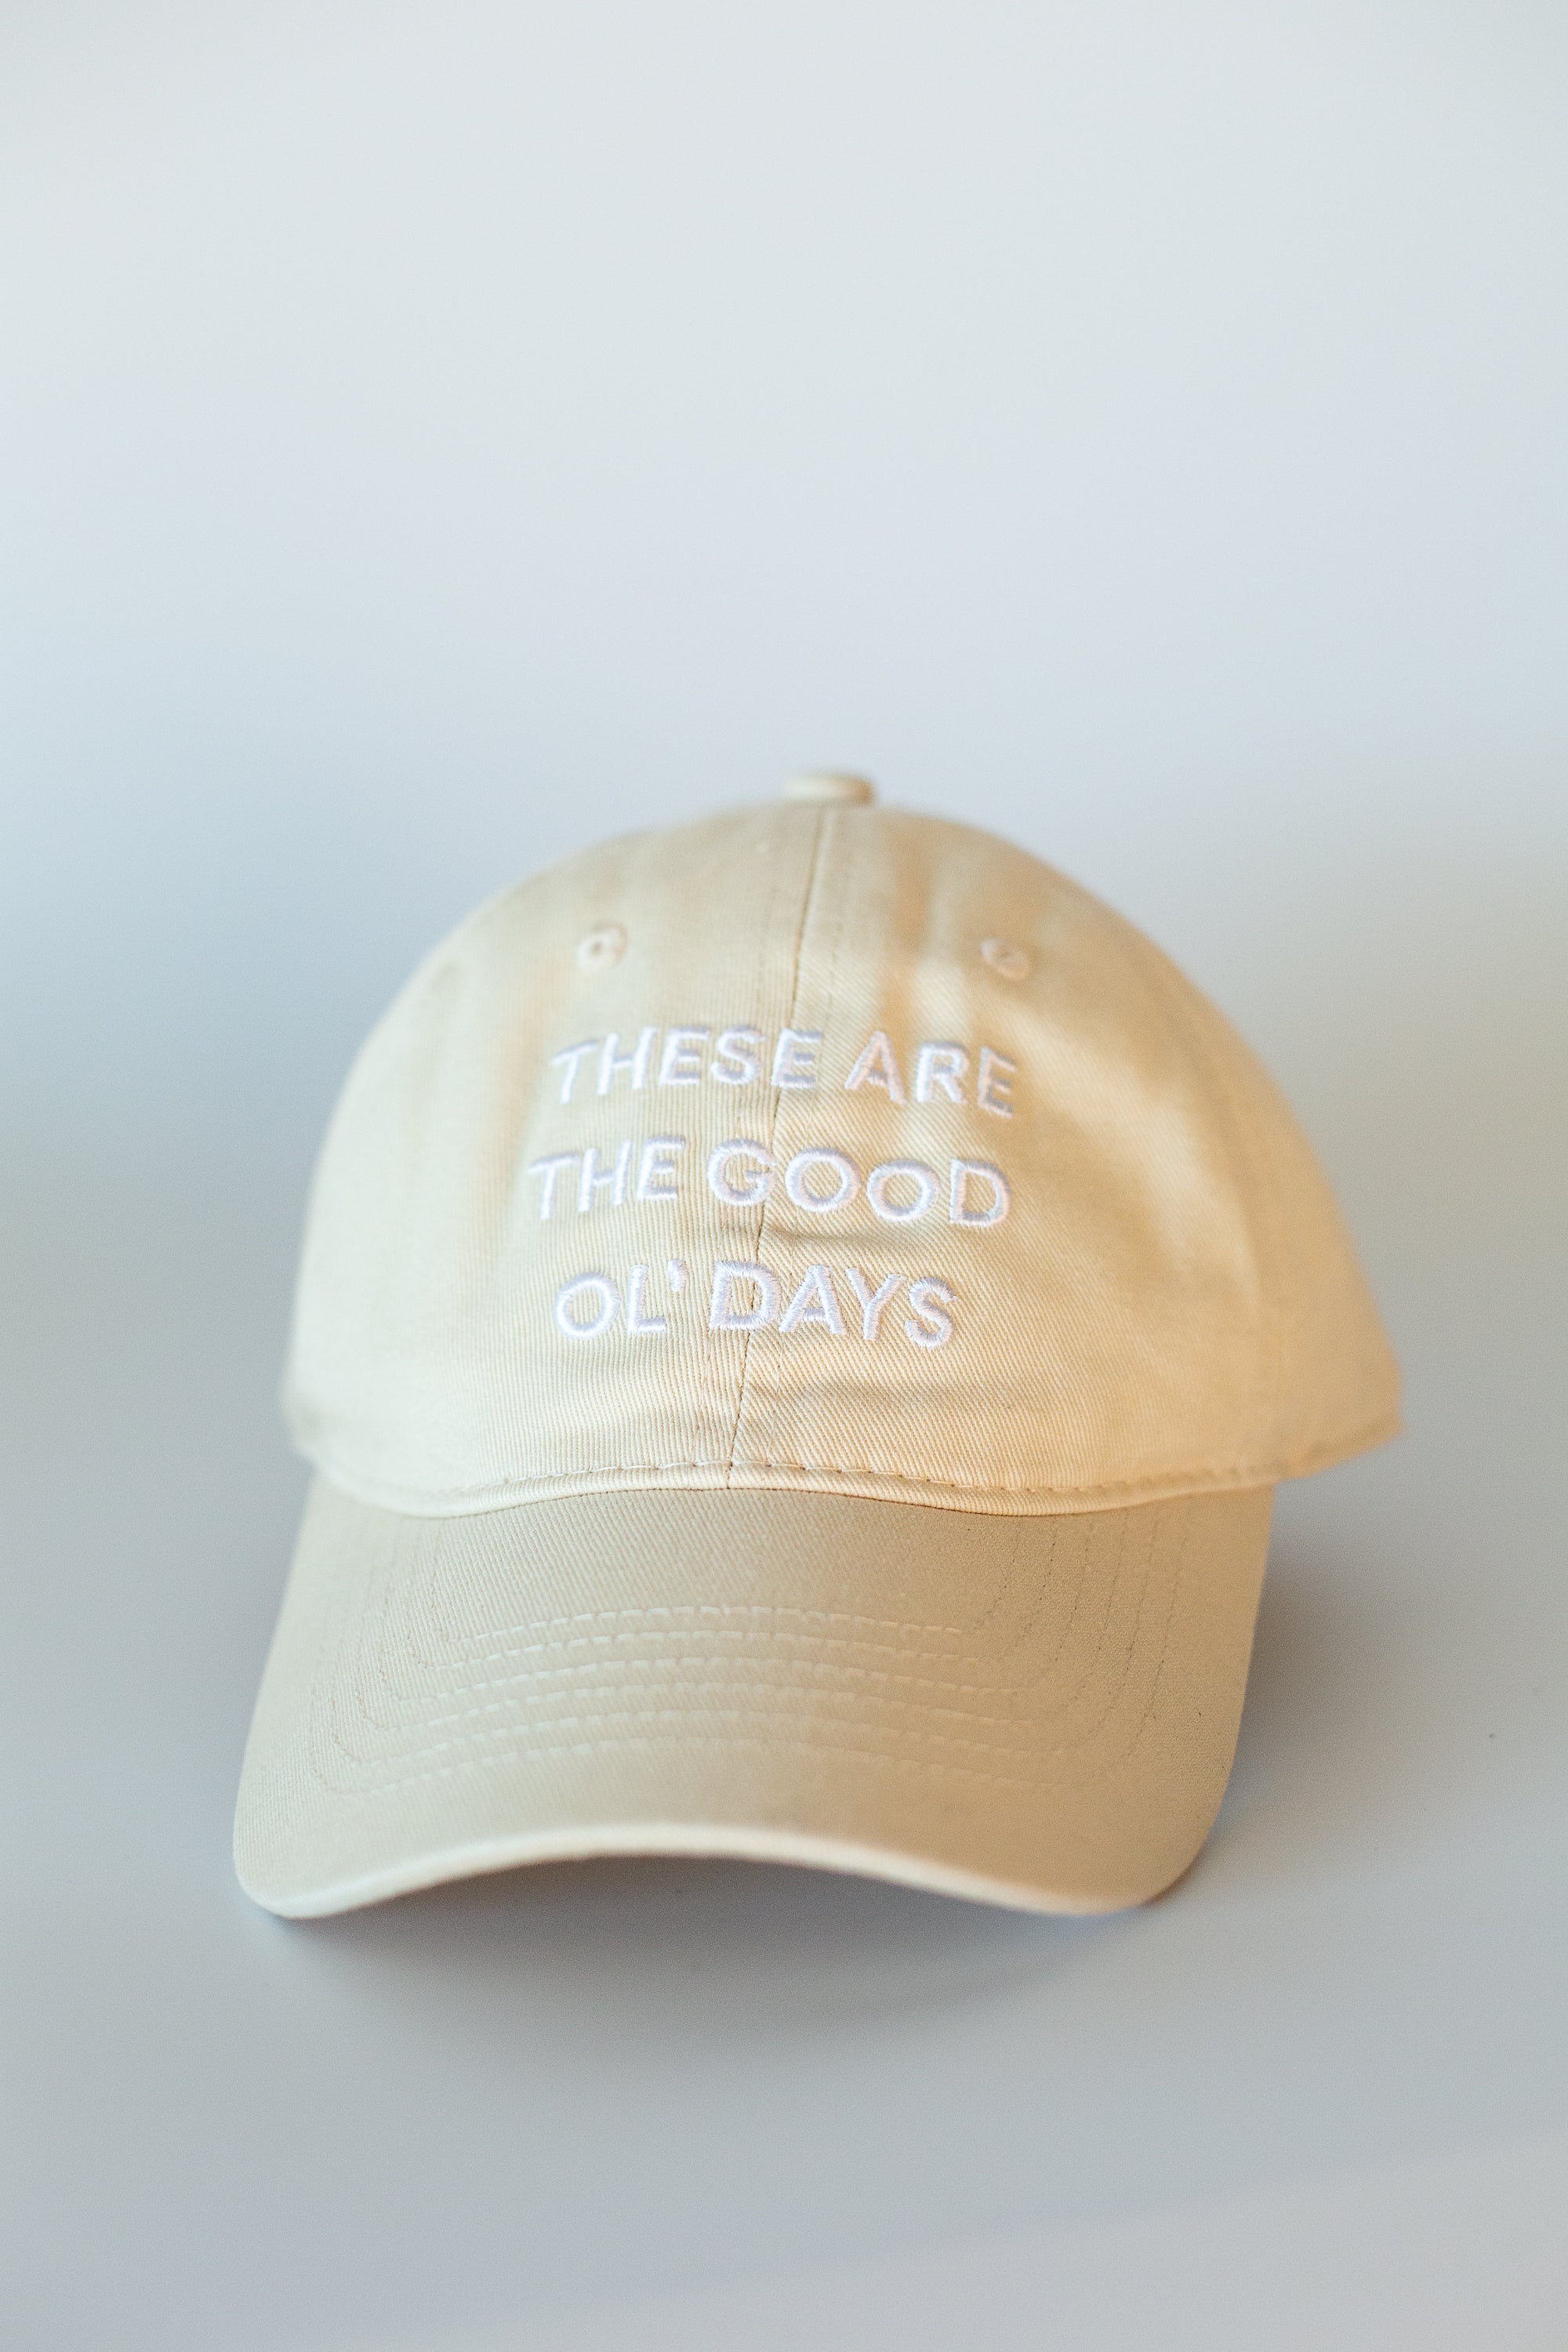 These are the good ol\' days - Baseball Cap Child Size – Modern Burlap